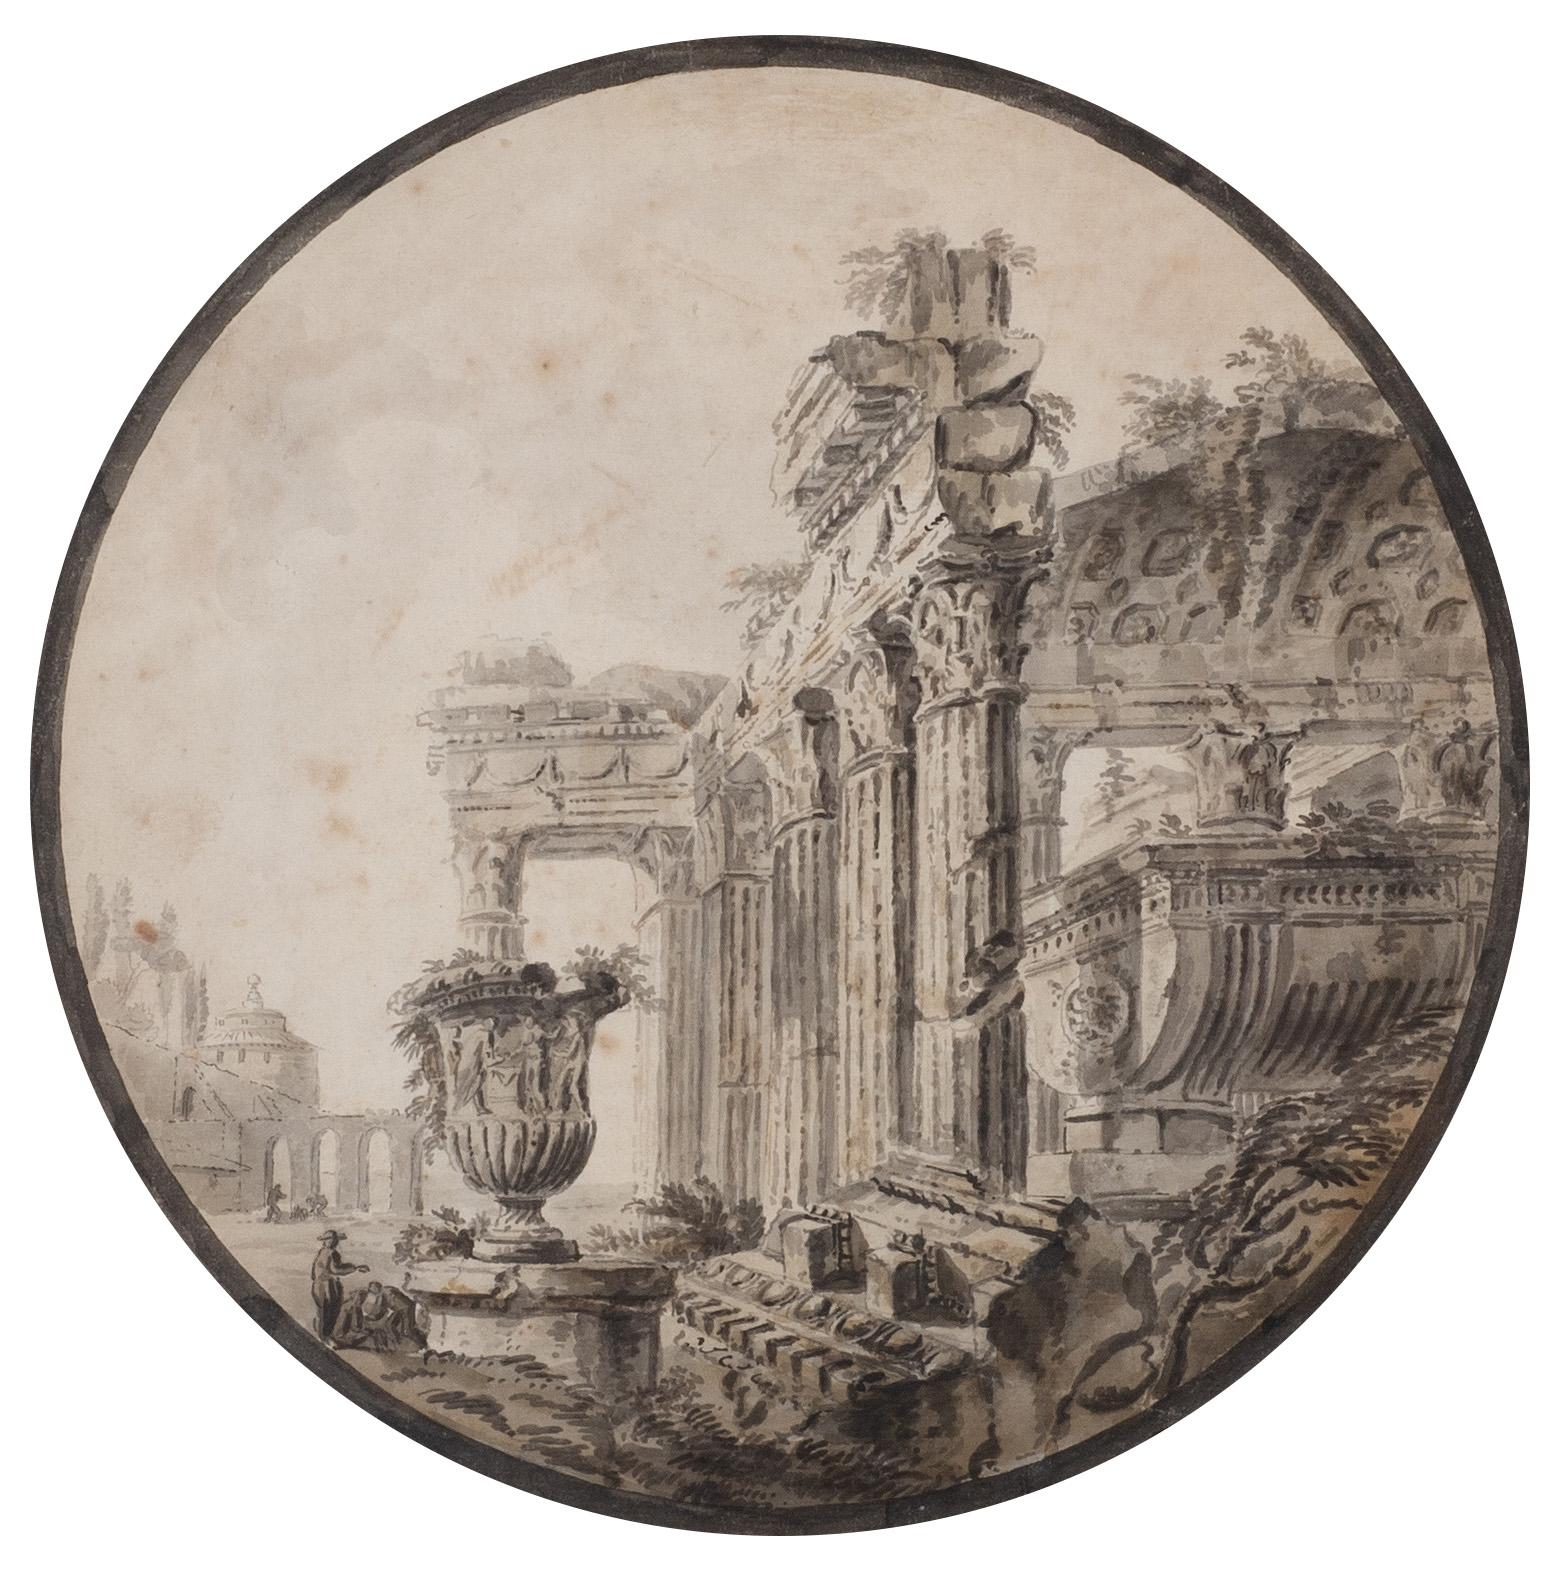 Neoclassical capriccio view of majestic Roman ruins with small figures engaged in daily activities in the background.
Pencil, ink and wash on paper. Set in a Louis XVI style giltwood frame.
Capricci, typically defined as an architectural fantasy,